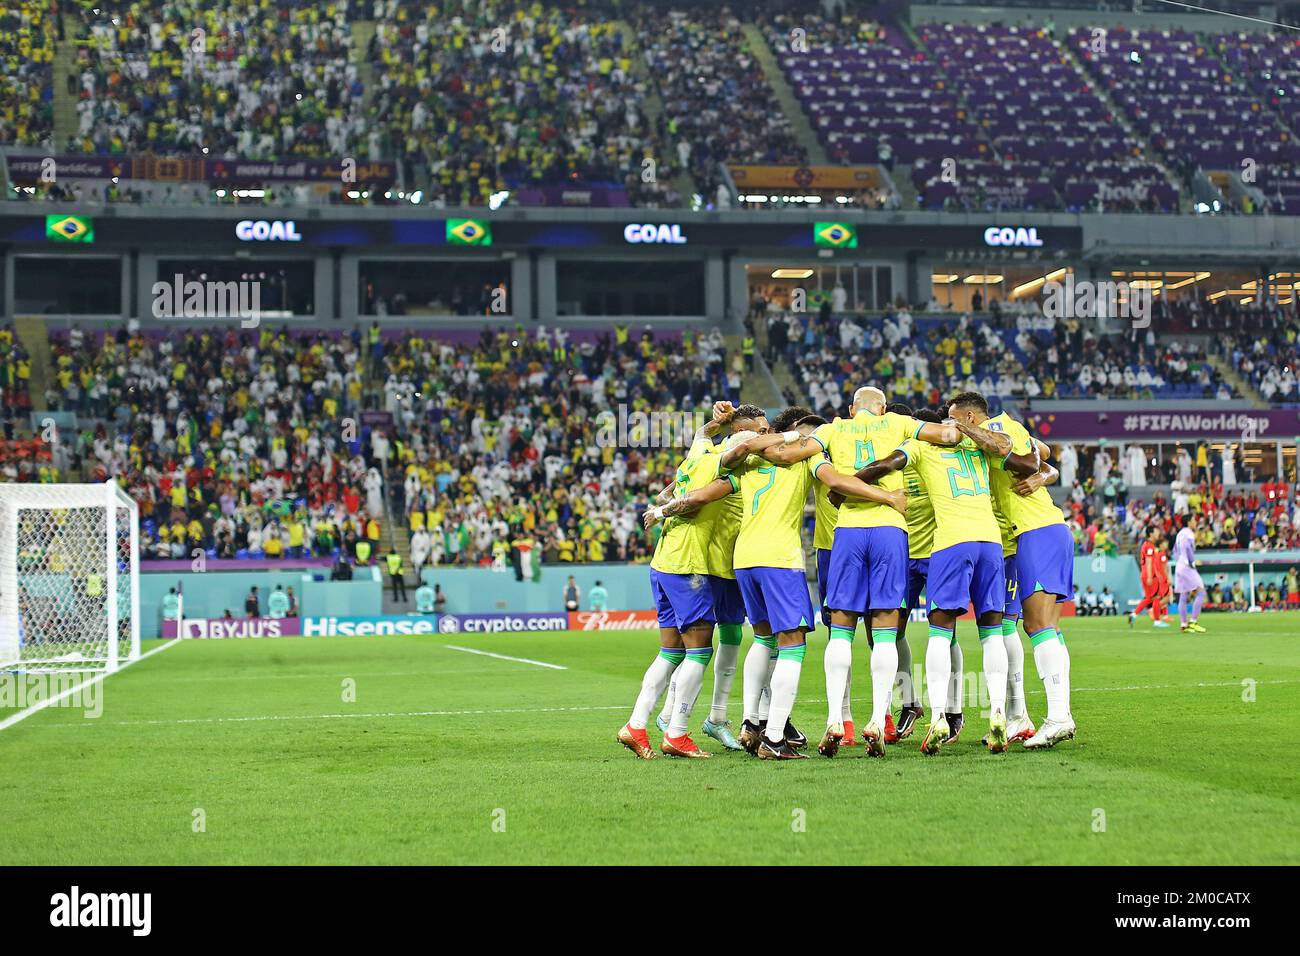 Doha, Qatar: 5th December 2022; FIFA World Cup final 16 round, Brazil versus South Korea: Players of Brasil, celebrate the goal from Vin&#xed;cius Jr. for 1-0 Stock Photo